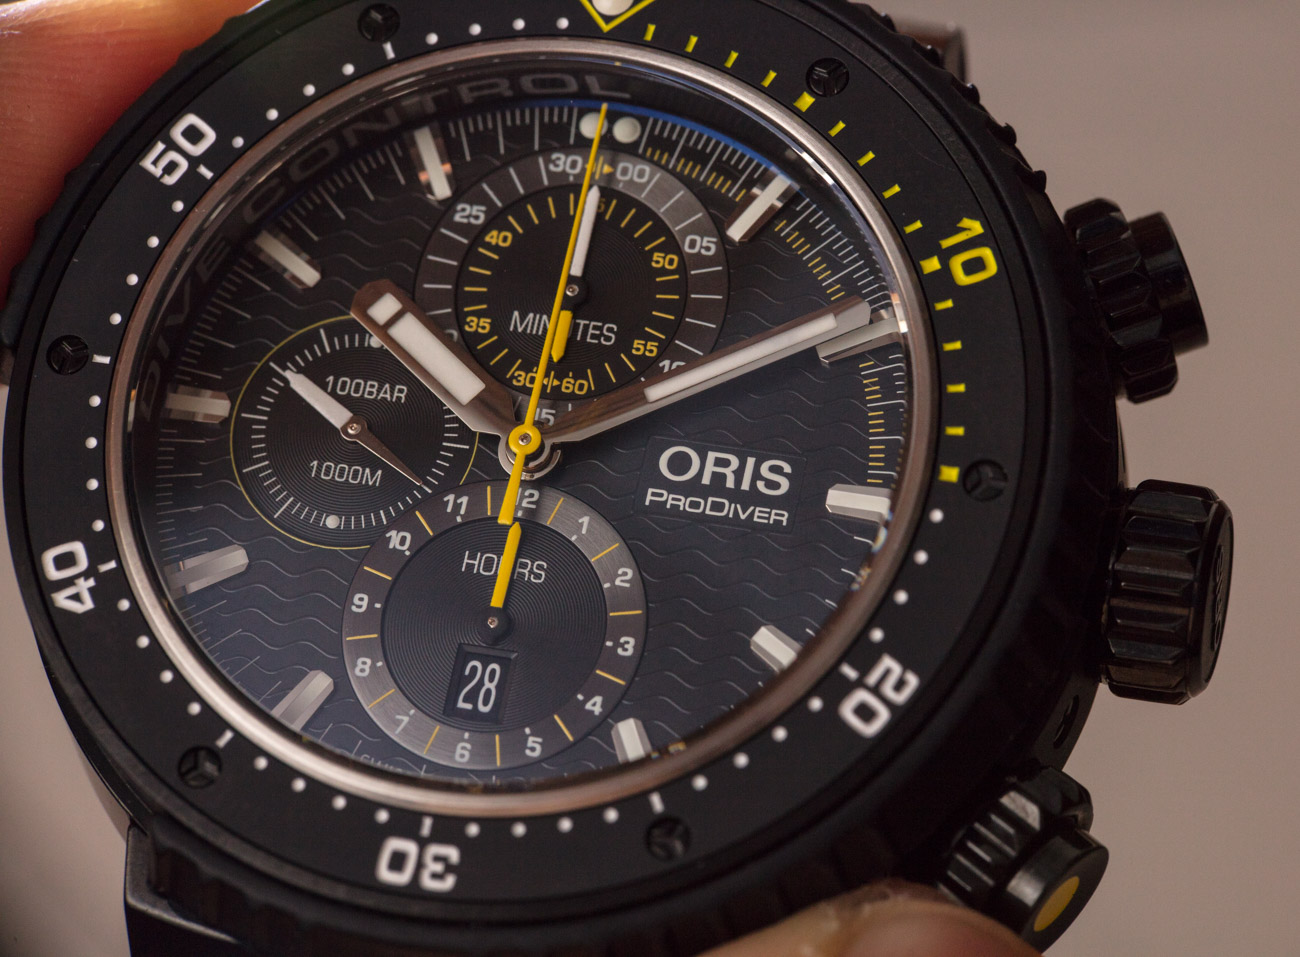 Oris ProDiver Dive Control Limited Edition Watch Hands-On